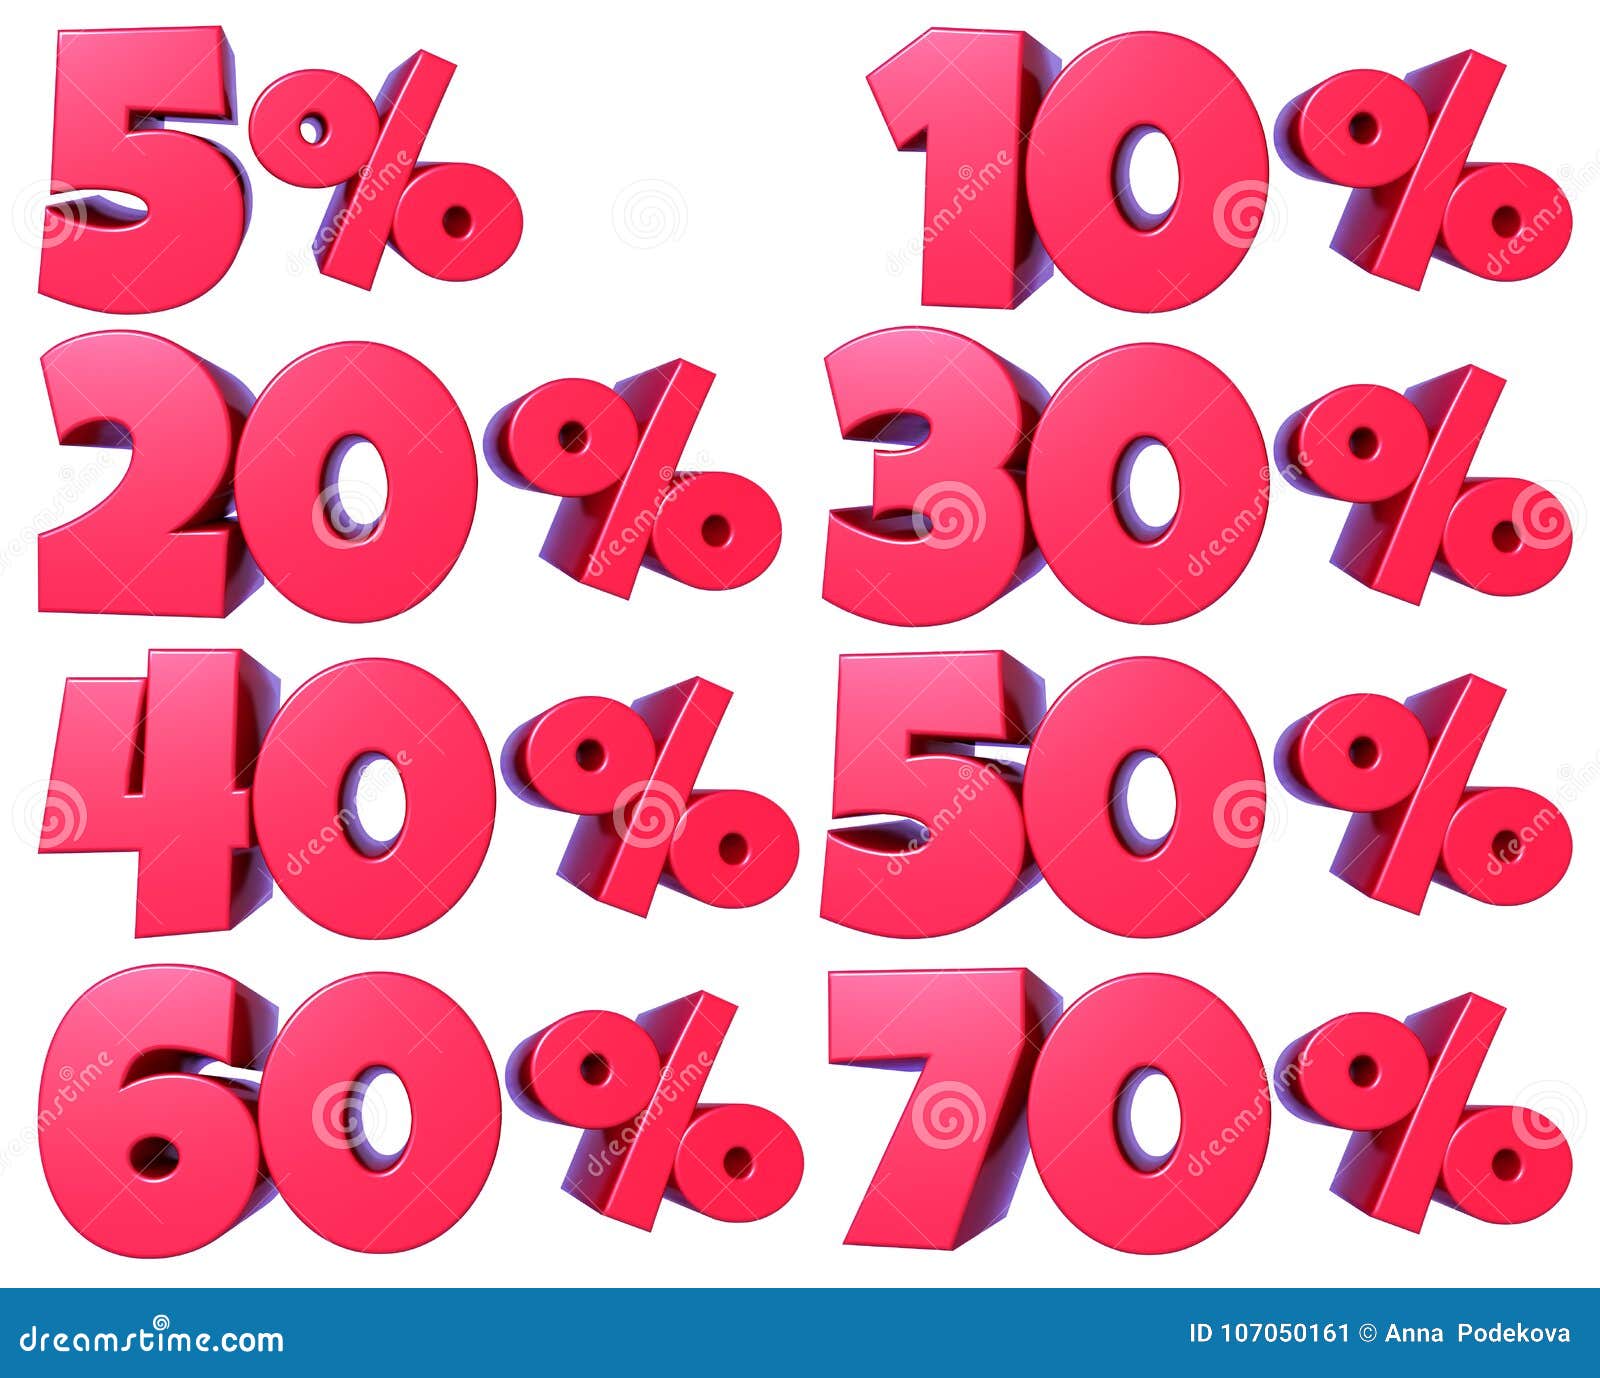 percentage numbers in red for discount sales, for banners and showcases, for web and print, with transparent png file attached.